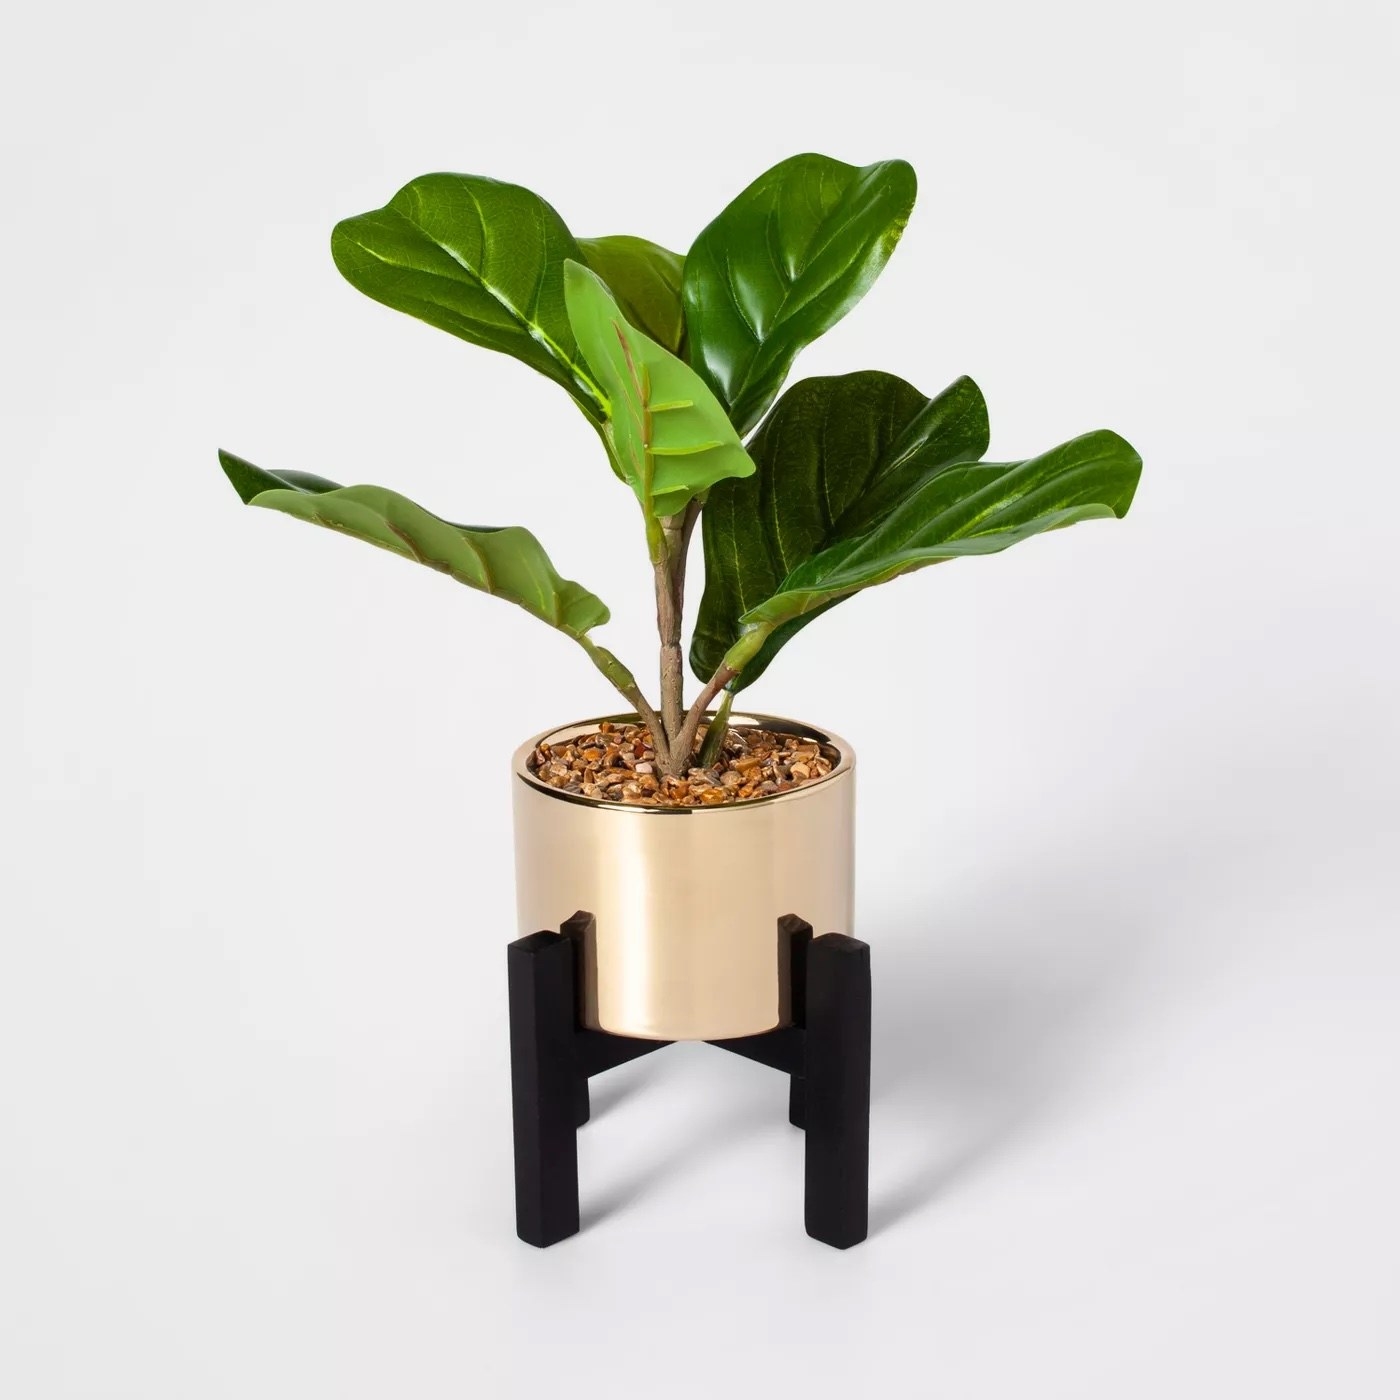 The faux plant in a vase on a stand